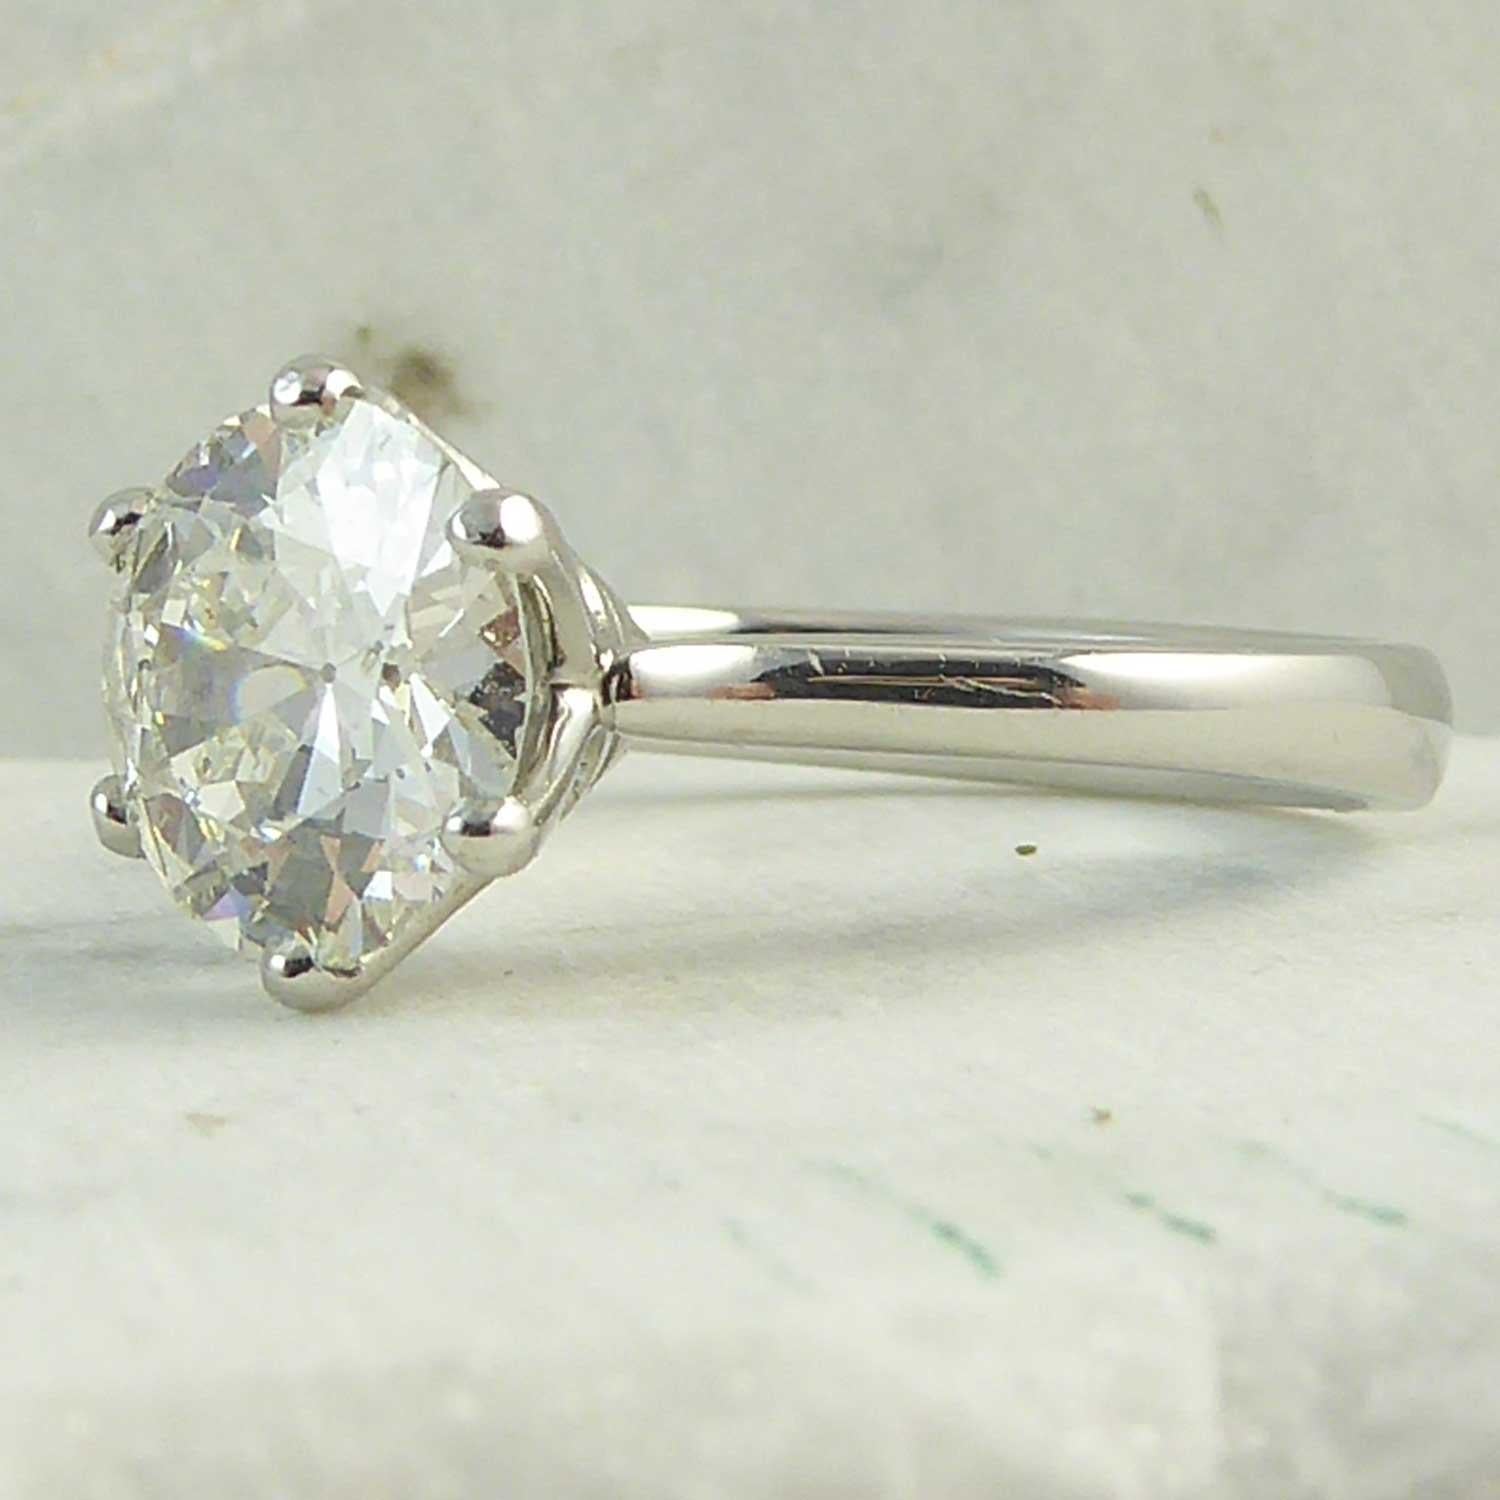 Modern 2.02 Carat Early Brilliant Cut Diamond Traditionally Set in a New Platinum Mount